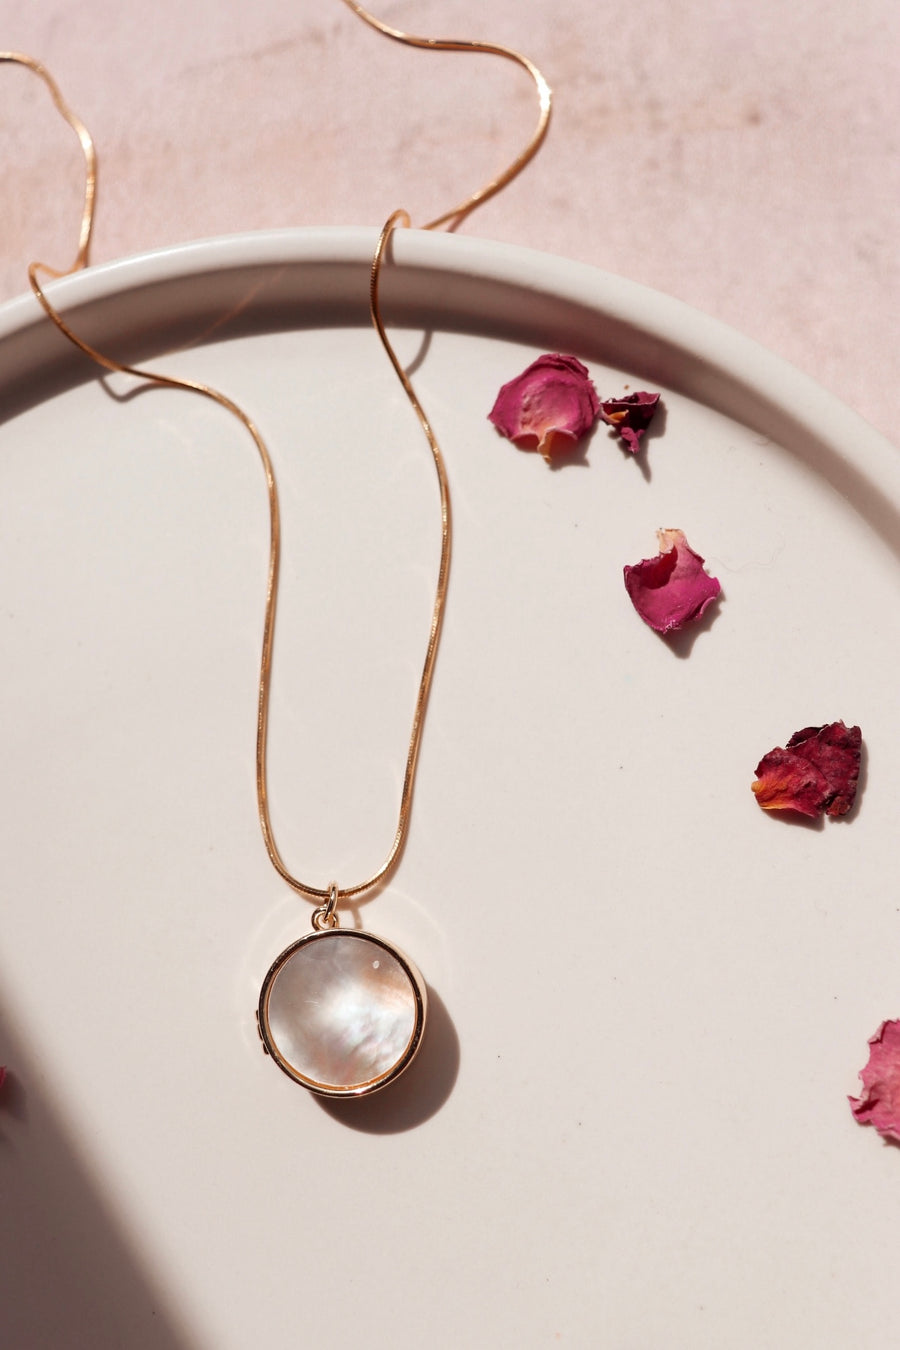 Full moon | mother of pearl intention locket